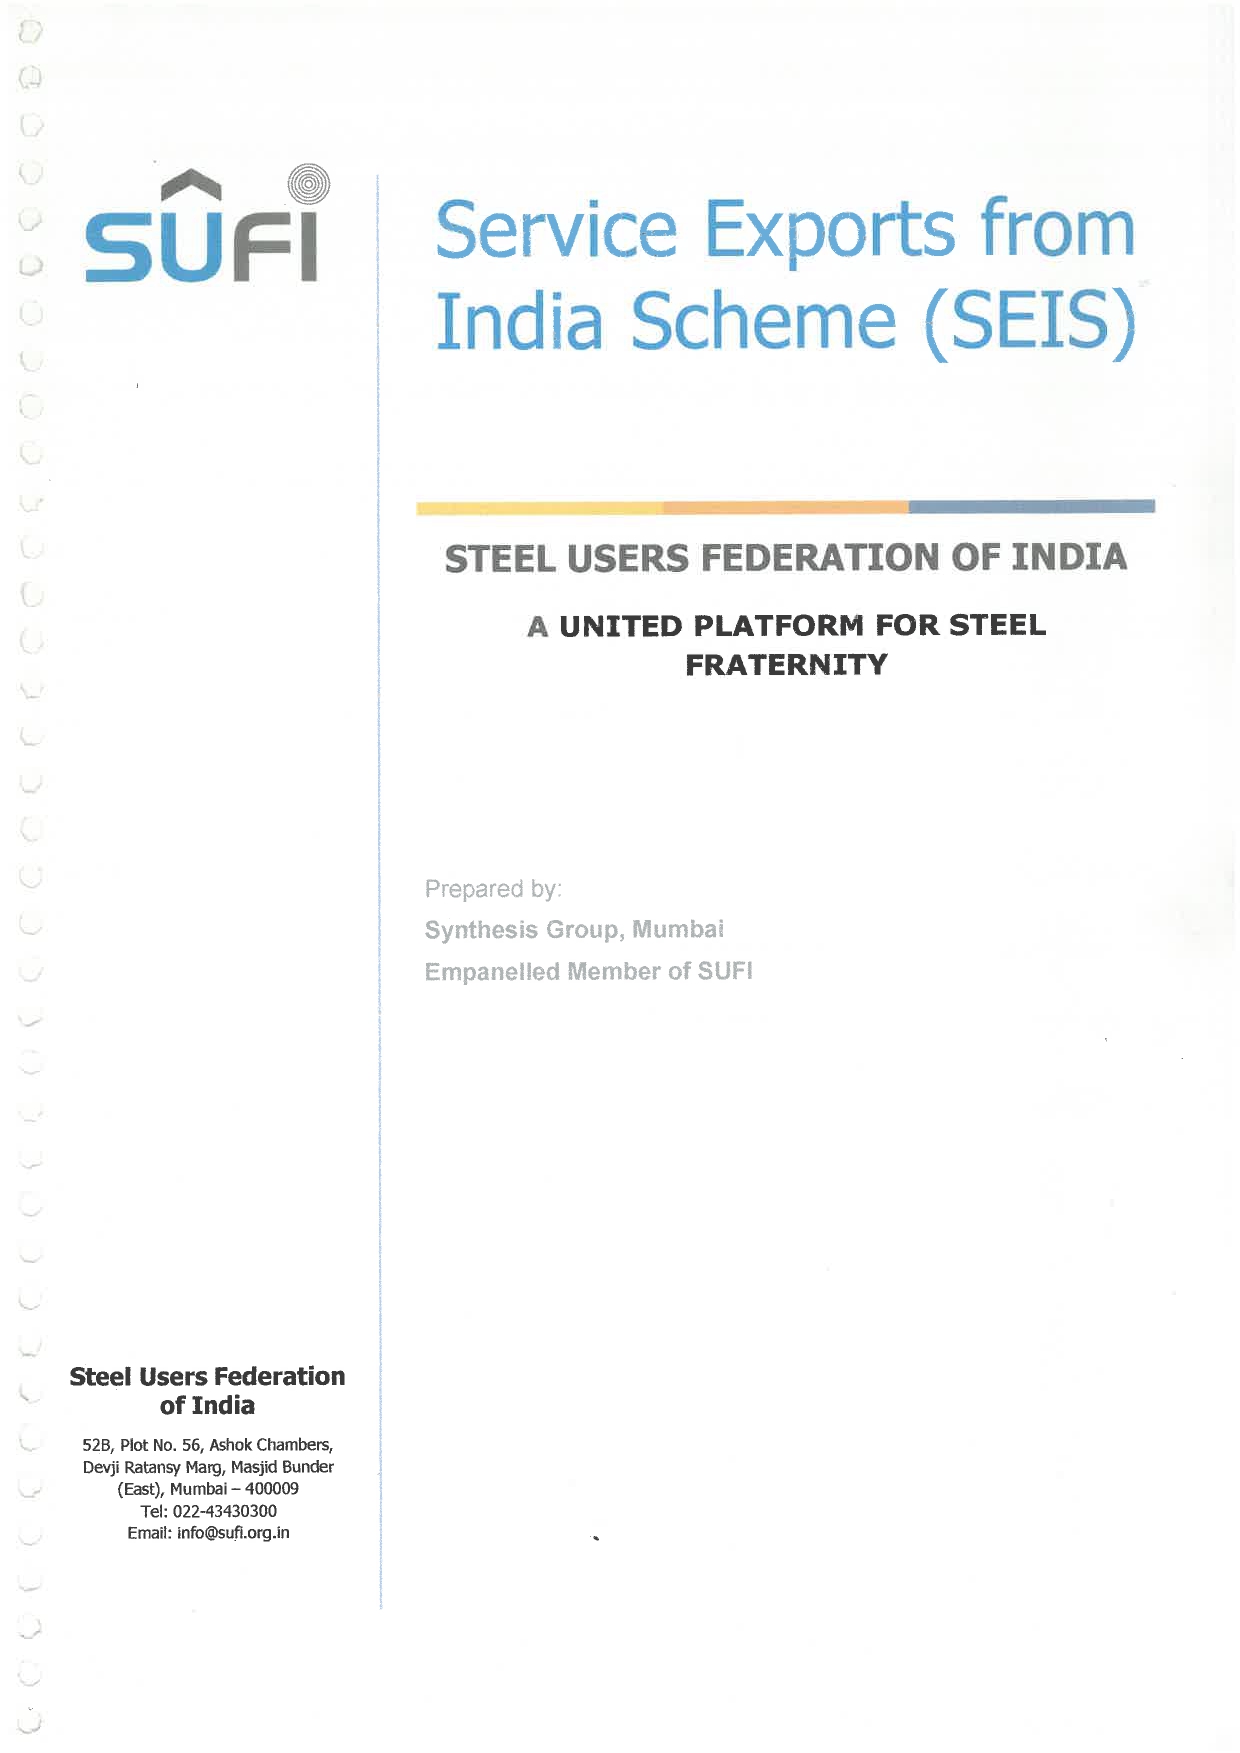 Service Exports from India Scheme (SEIS)